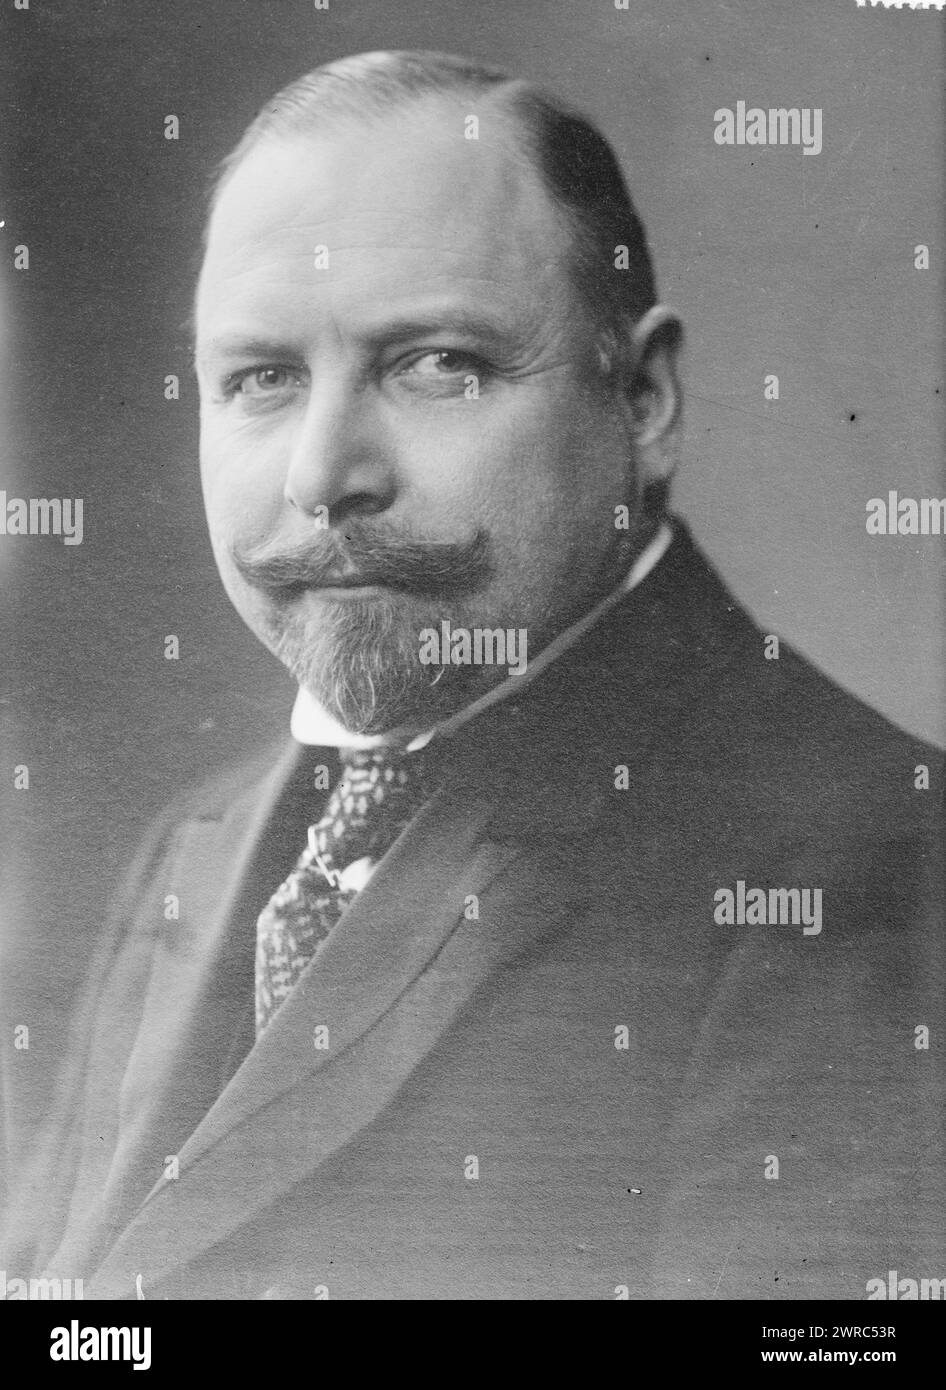 C. Th. Zahle, Photograph shows Carl Theodor Zahle (1866-1946), a Danish lawyer and politician who served as prime minister of Denmark from 1909-1910 and from 1913-1920., between ca. 1915 and ca. 1920, Glass negatives, 1 negative: glass Stock Photo